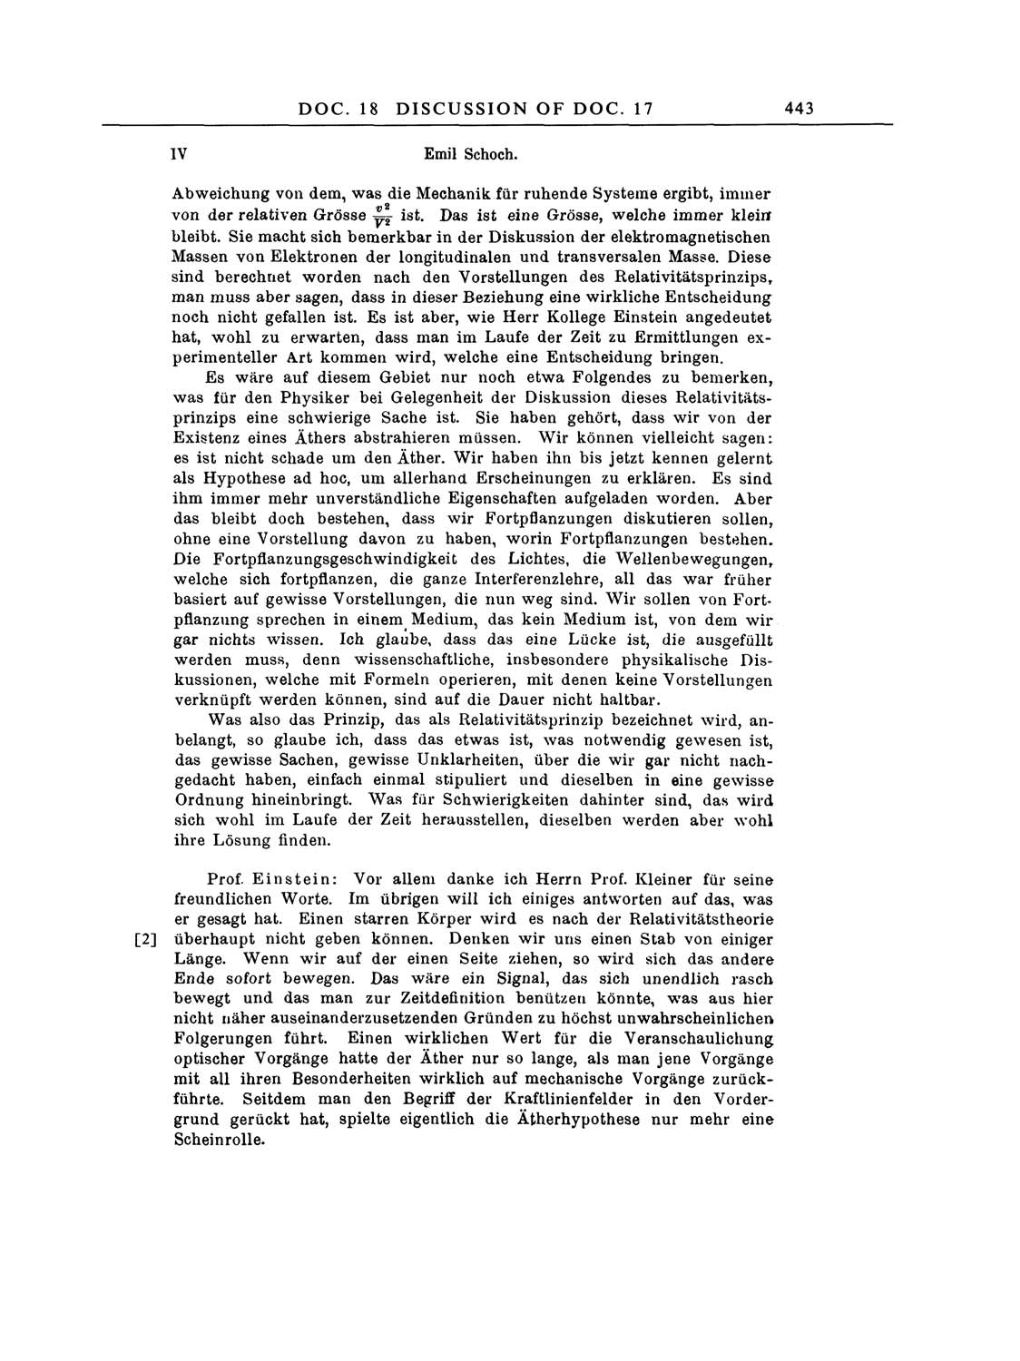 Volume 3: The Swiss Years: Writings 1909-1911 page 443